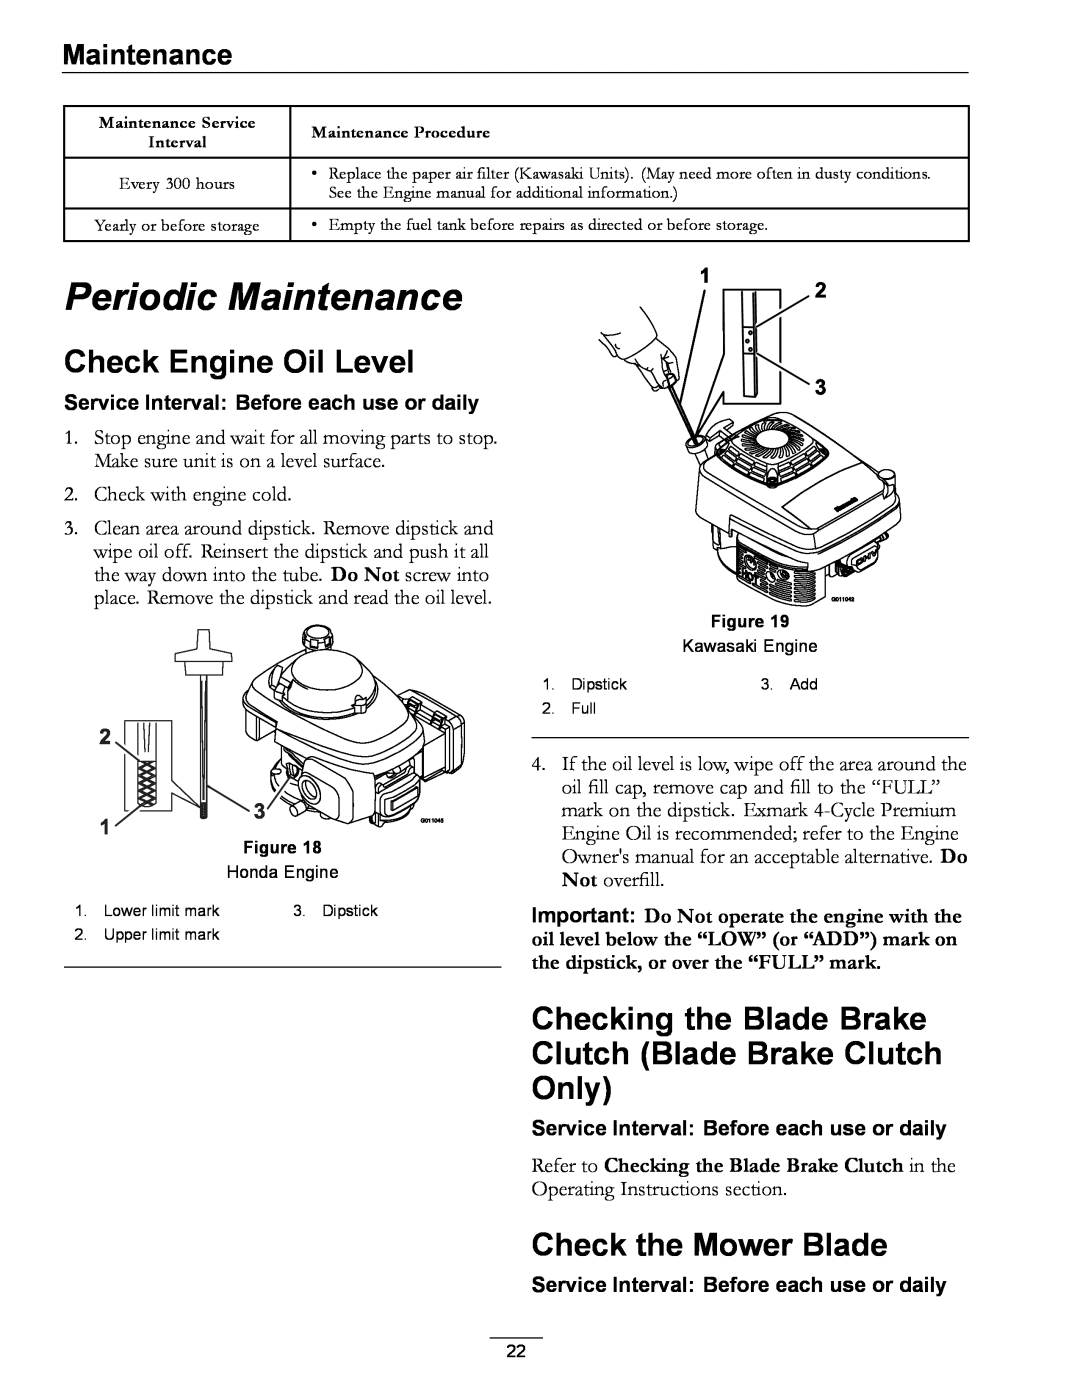 Exmark COMMERCIAL 21 Periodic Maintenance, Check Engine Oil Level, Checking the Blade Brake Clutch Blade Brake Clutch Only 